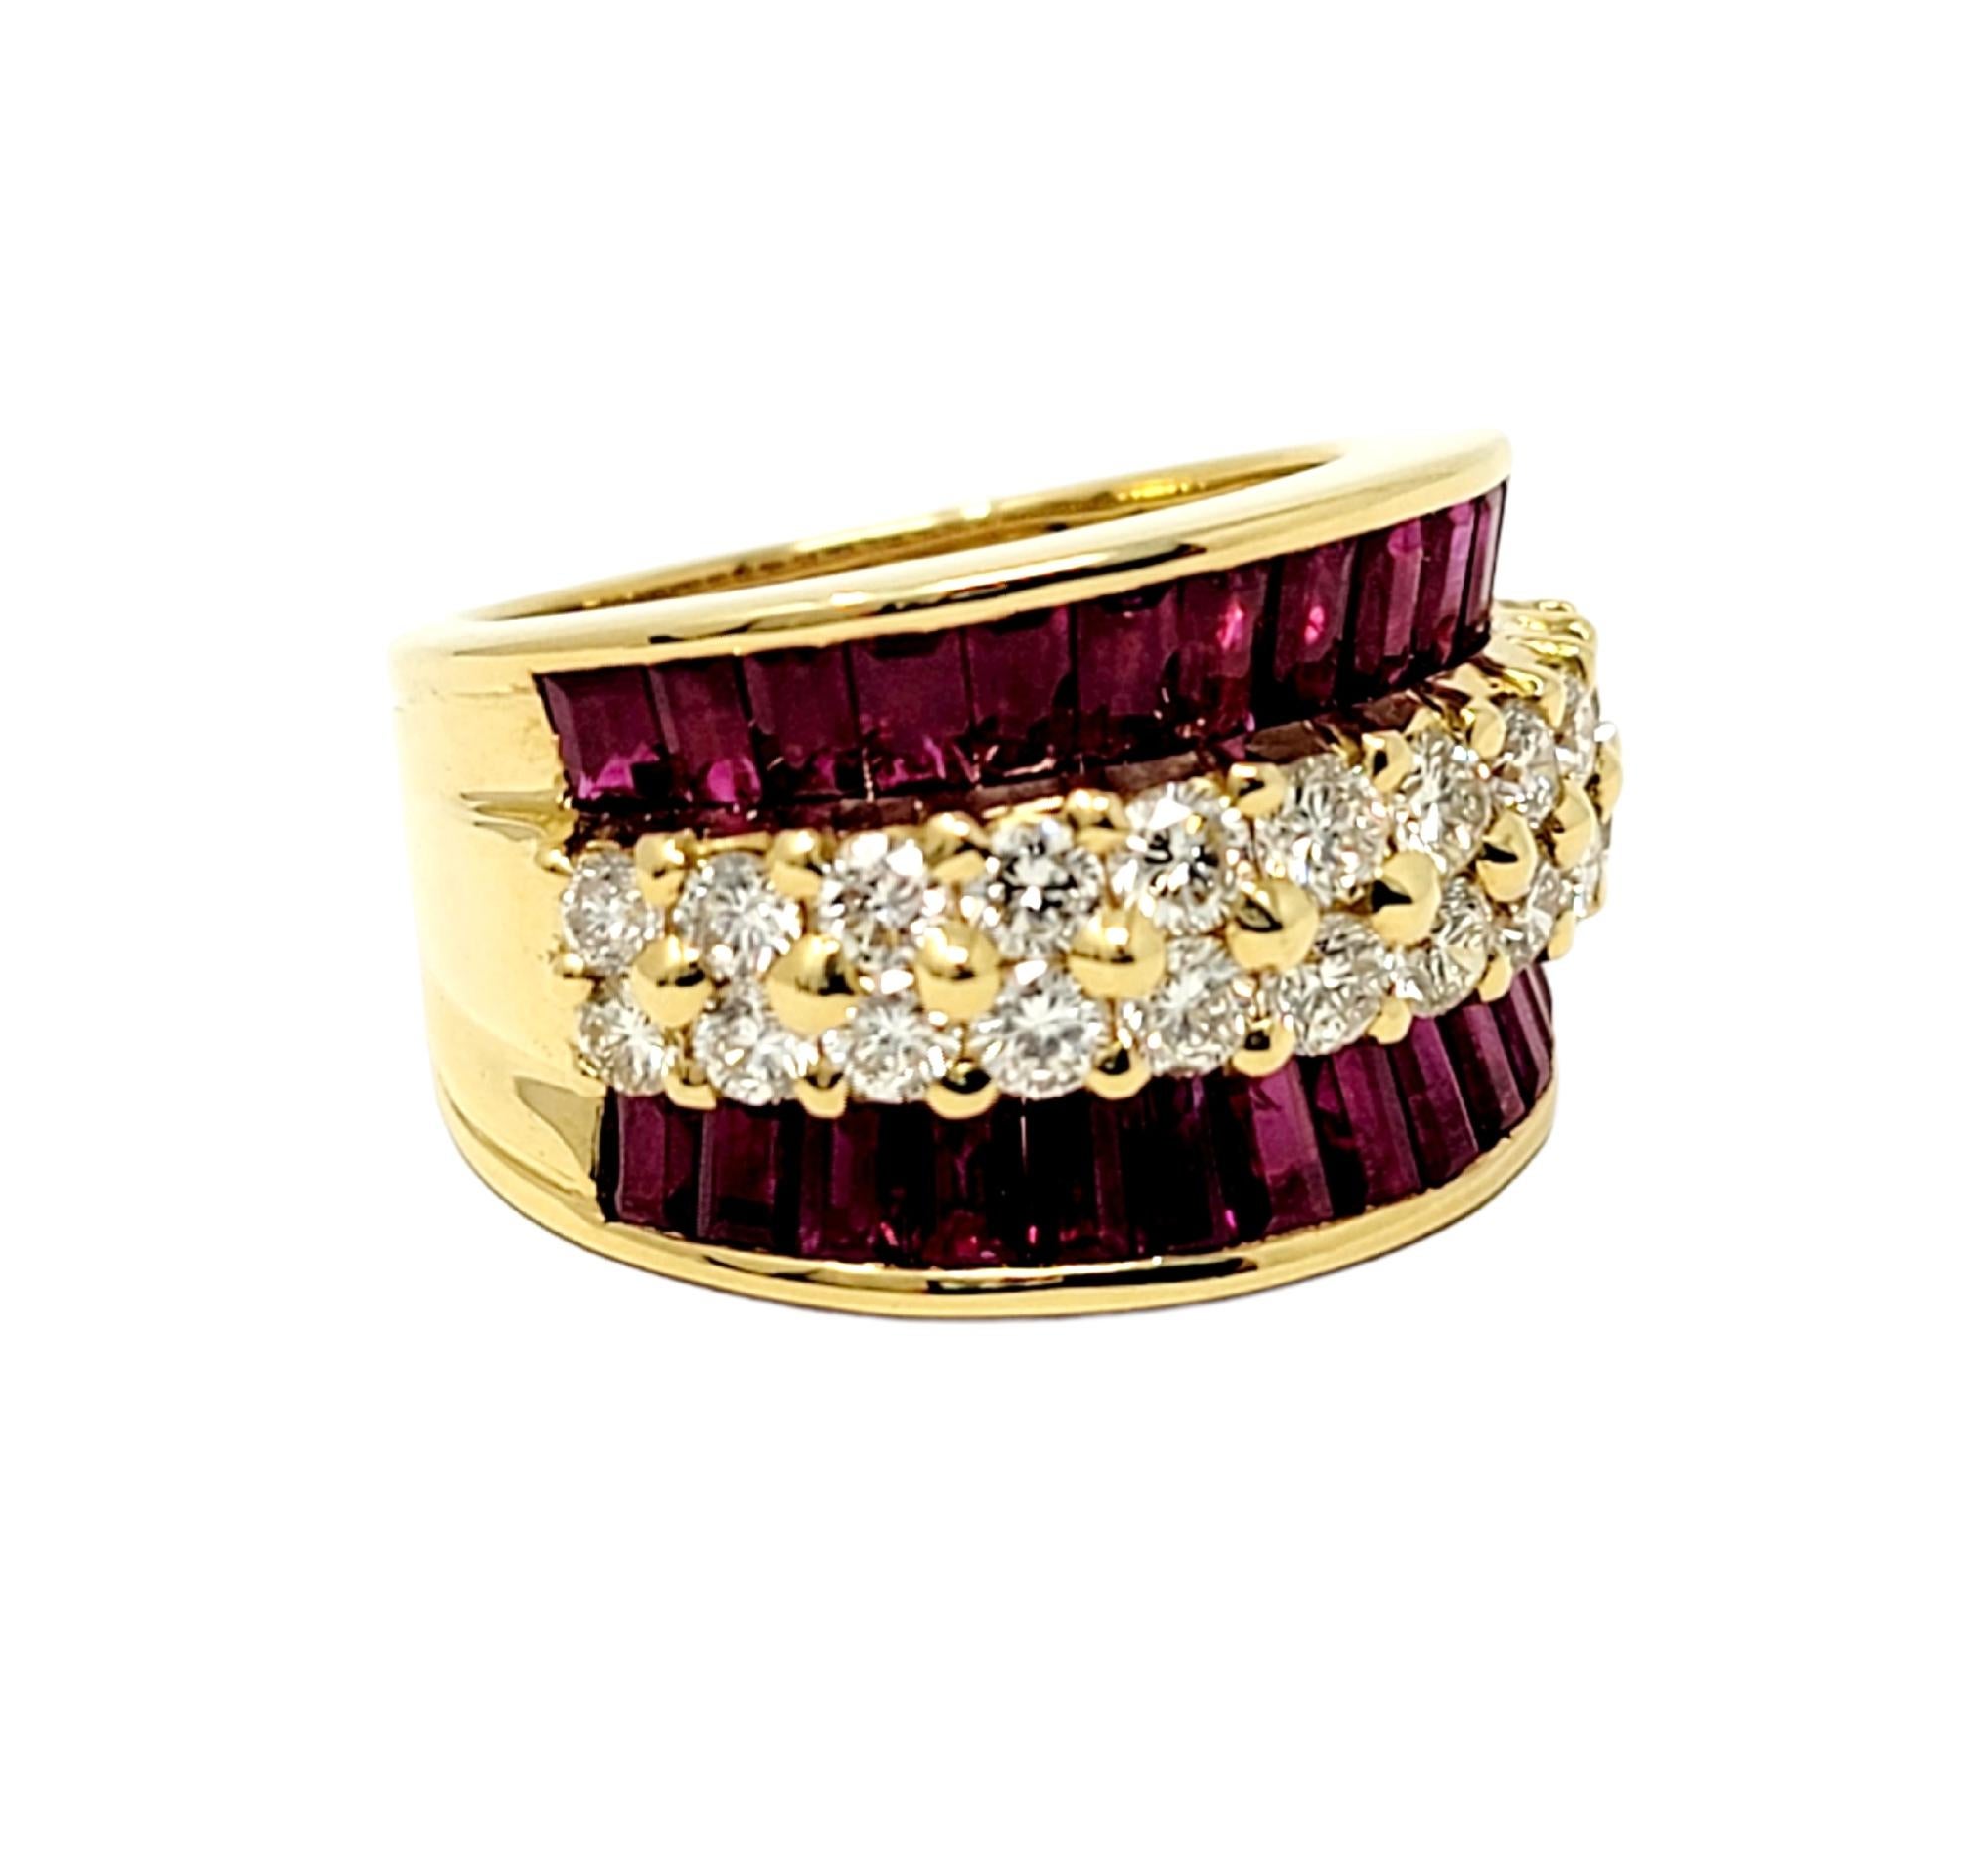 Ring size: 5.75

Gorgeous ruby & diamond ring bursting with vibrant color and incredible sparkle. This gorgeous piece absolutely dazzles with its rich red rubies and bright white diamonds. This beautiful ring features 2 rows of natural white